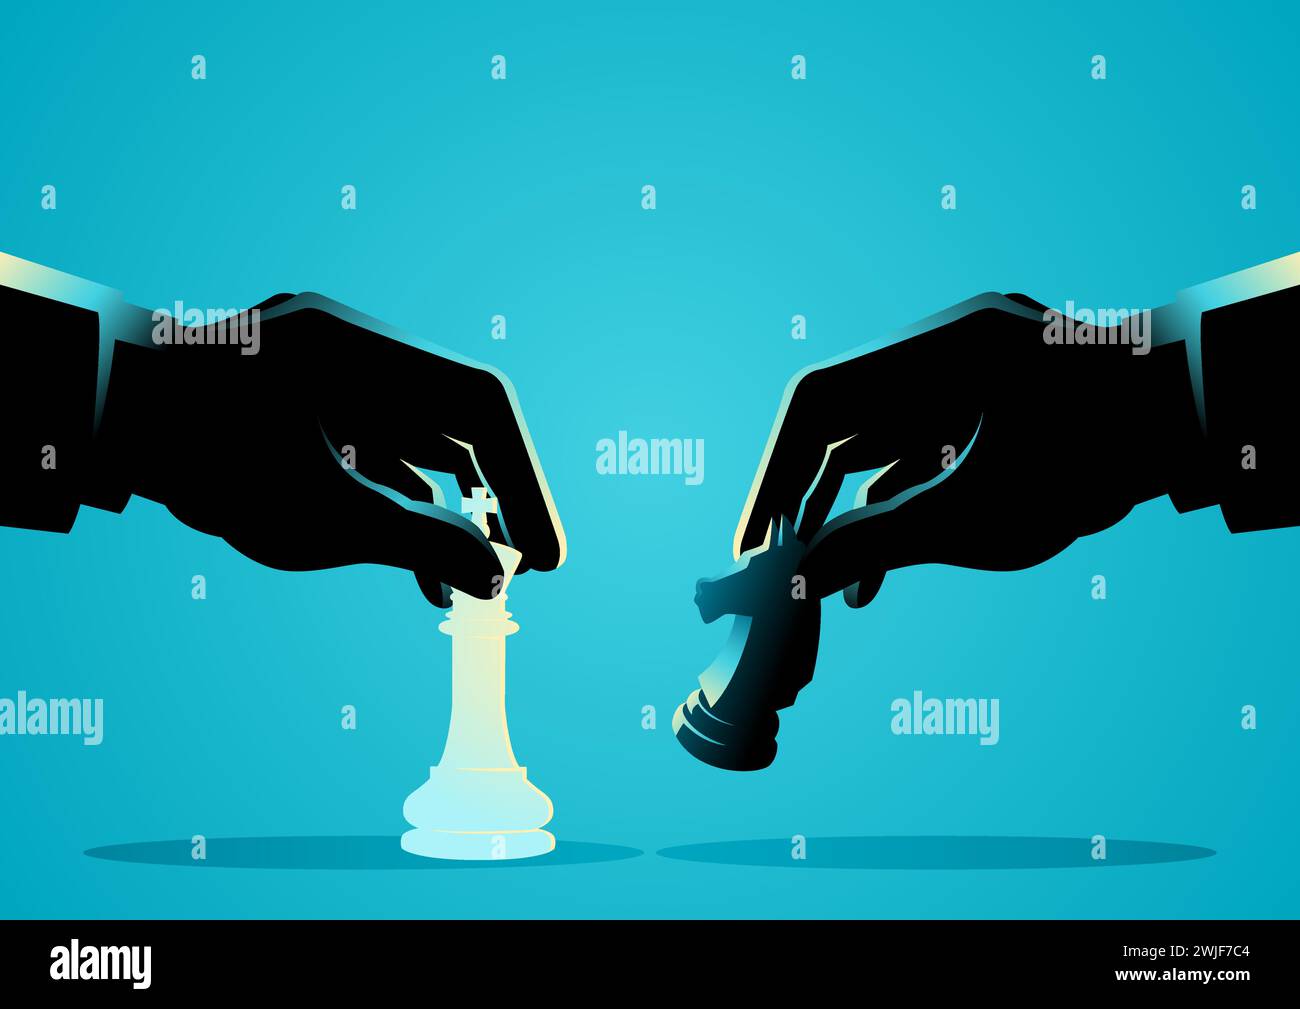 Business concept of businessmen playing chess, featuring a king chess piece against a knight chess piece, competition, and strategic moves in business Stock Vector